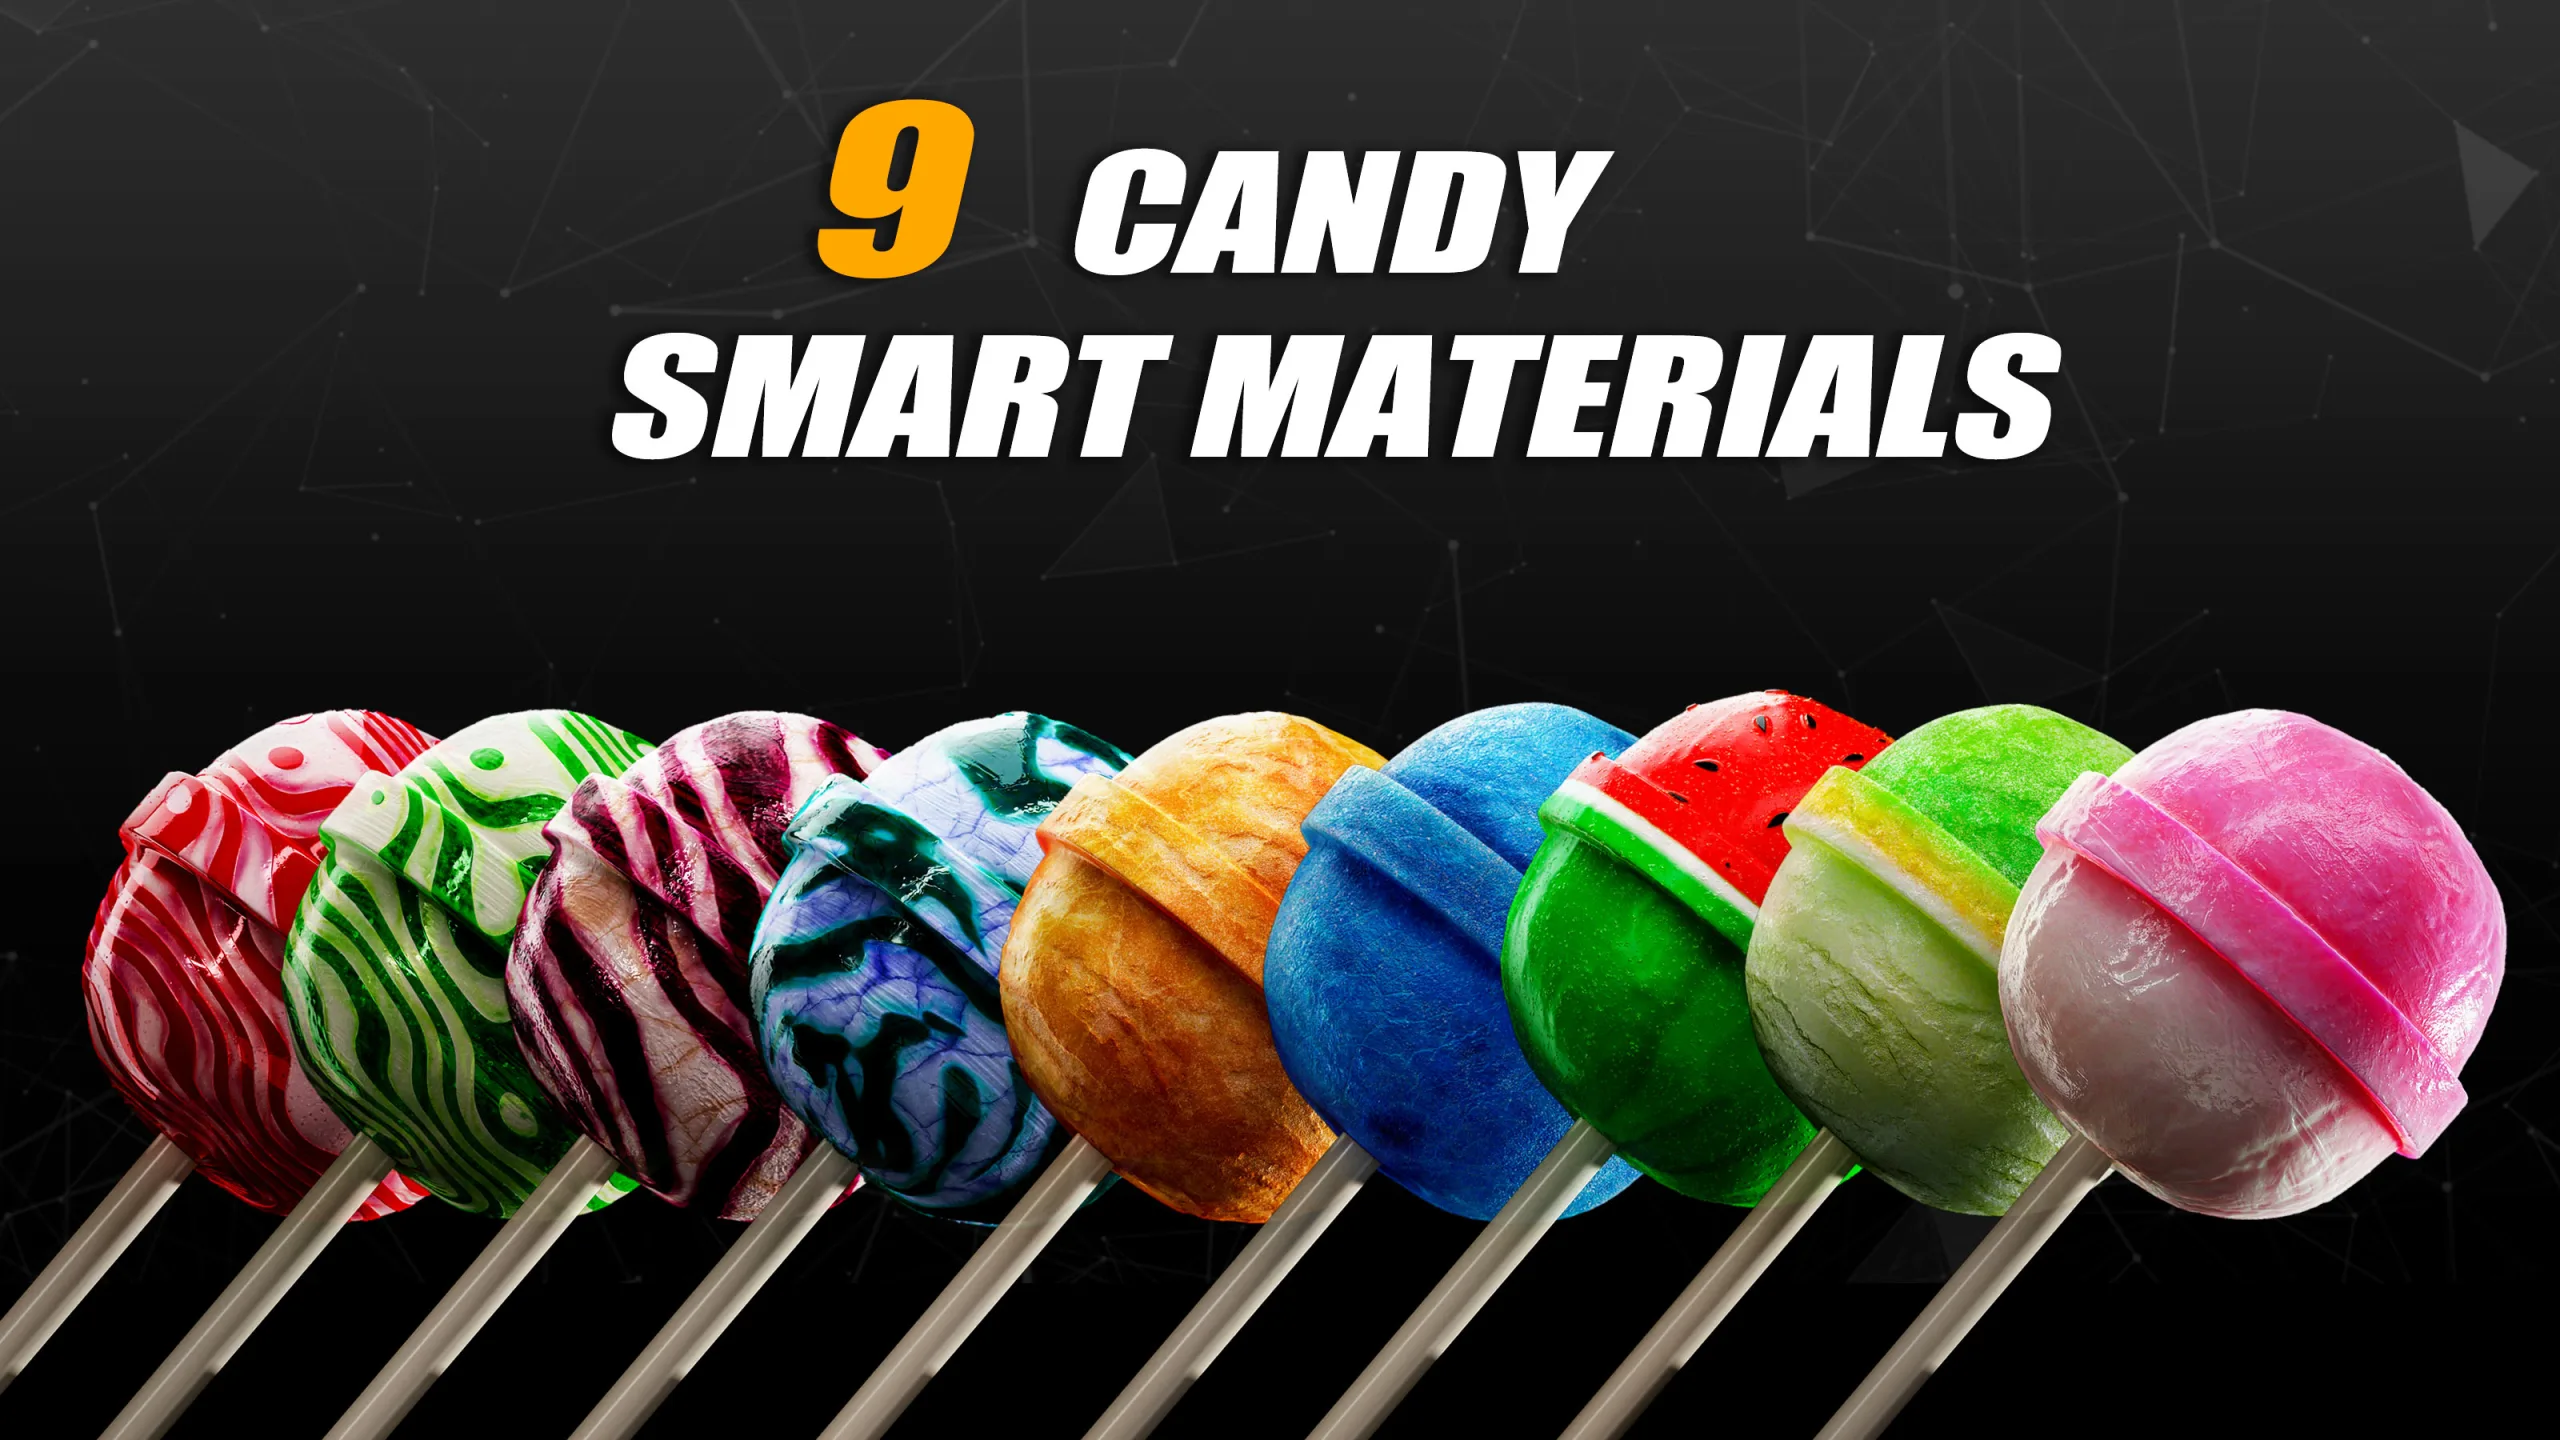 36 Food And Candy Smart Materials (Burger-Bread-Cheese-Candy_Chocolate)